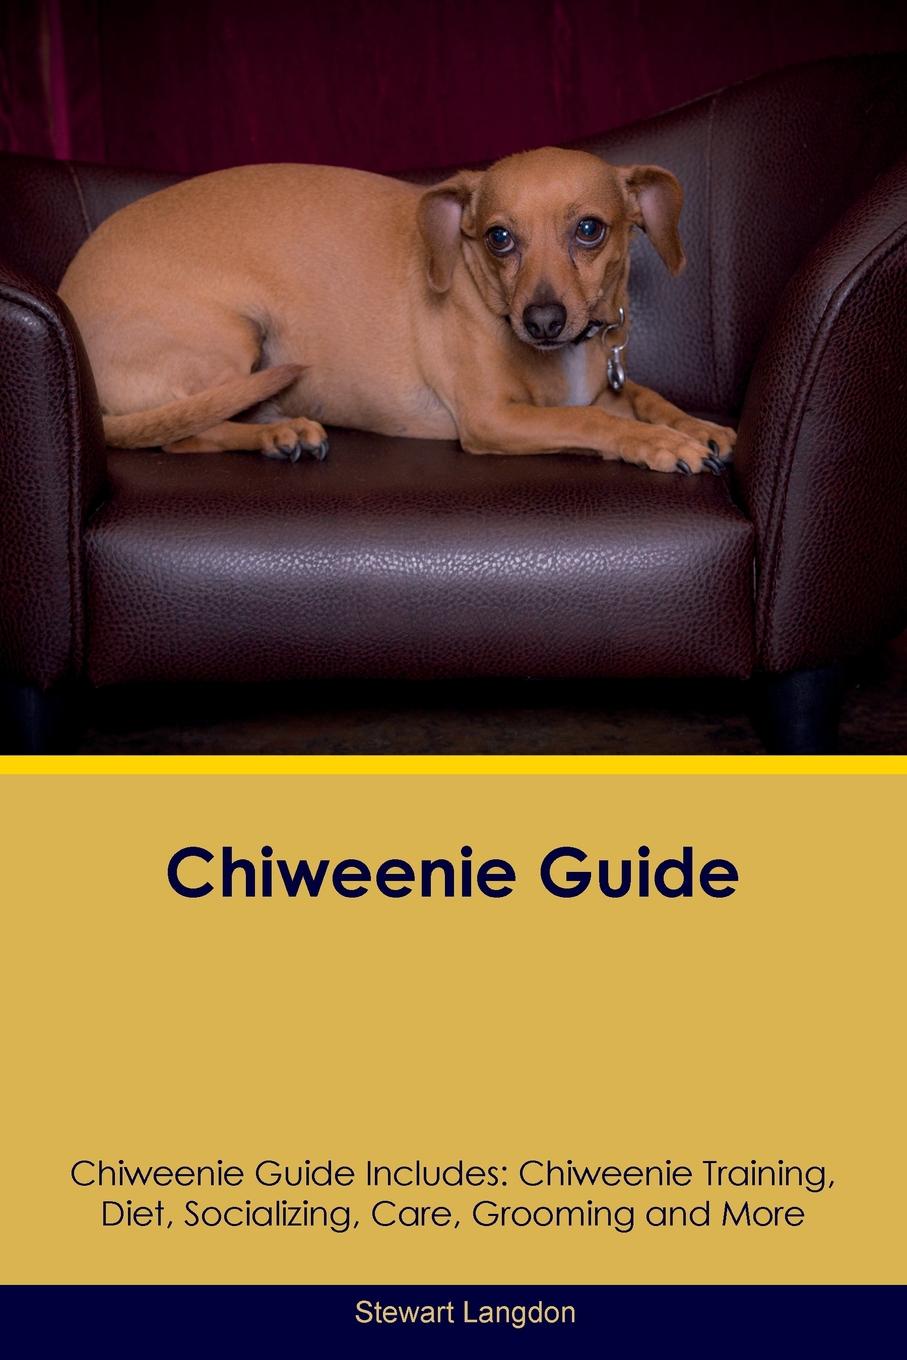 Chiweenie Guide Chiweenie Guide Includes. Chiweenie Training, Diet, Socializing, Care, Grooming, Breeding and More